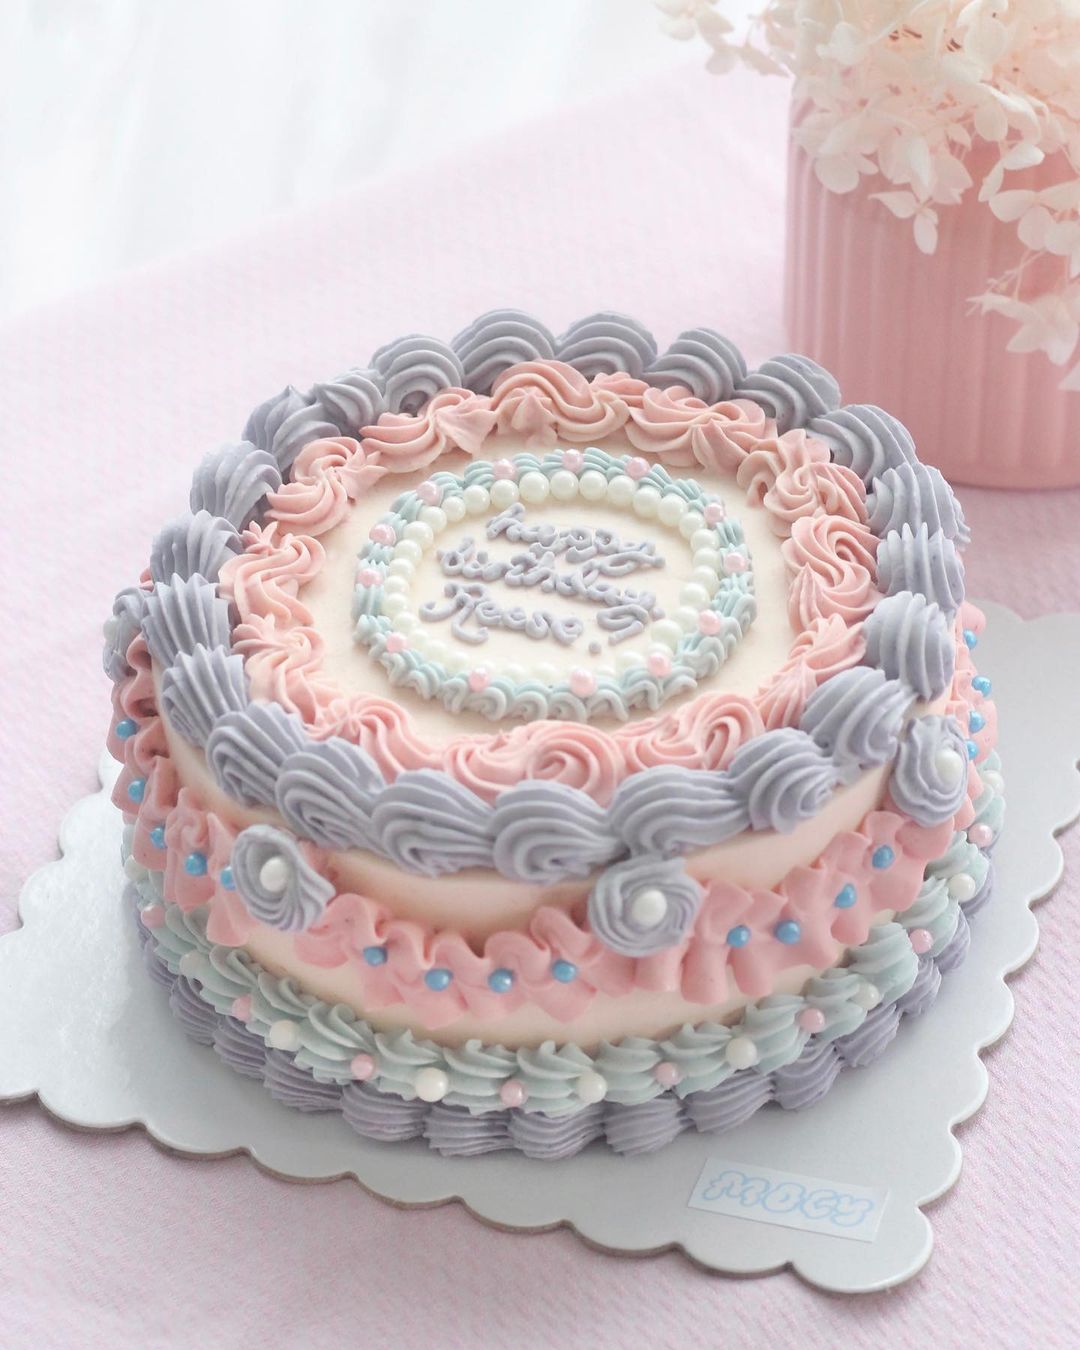 Check Out These Pretty Jelly Cakes From Dessert Shop 'Mocy'